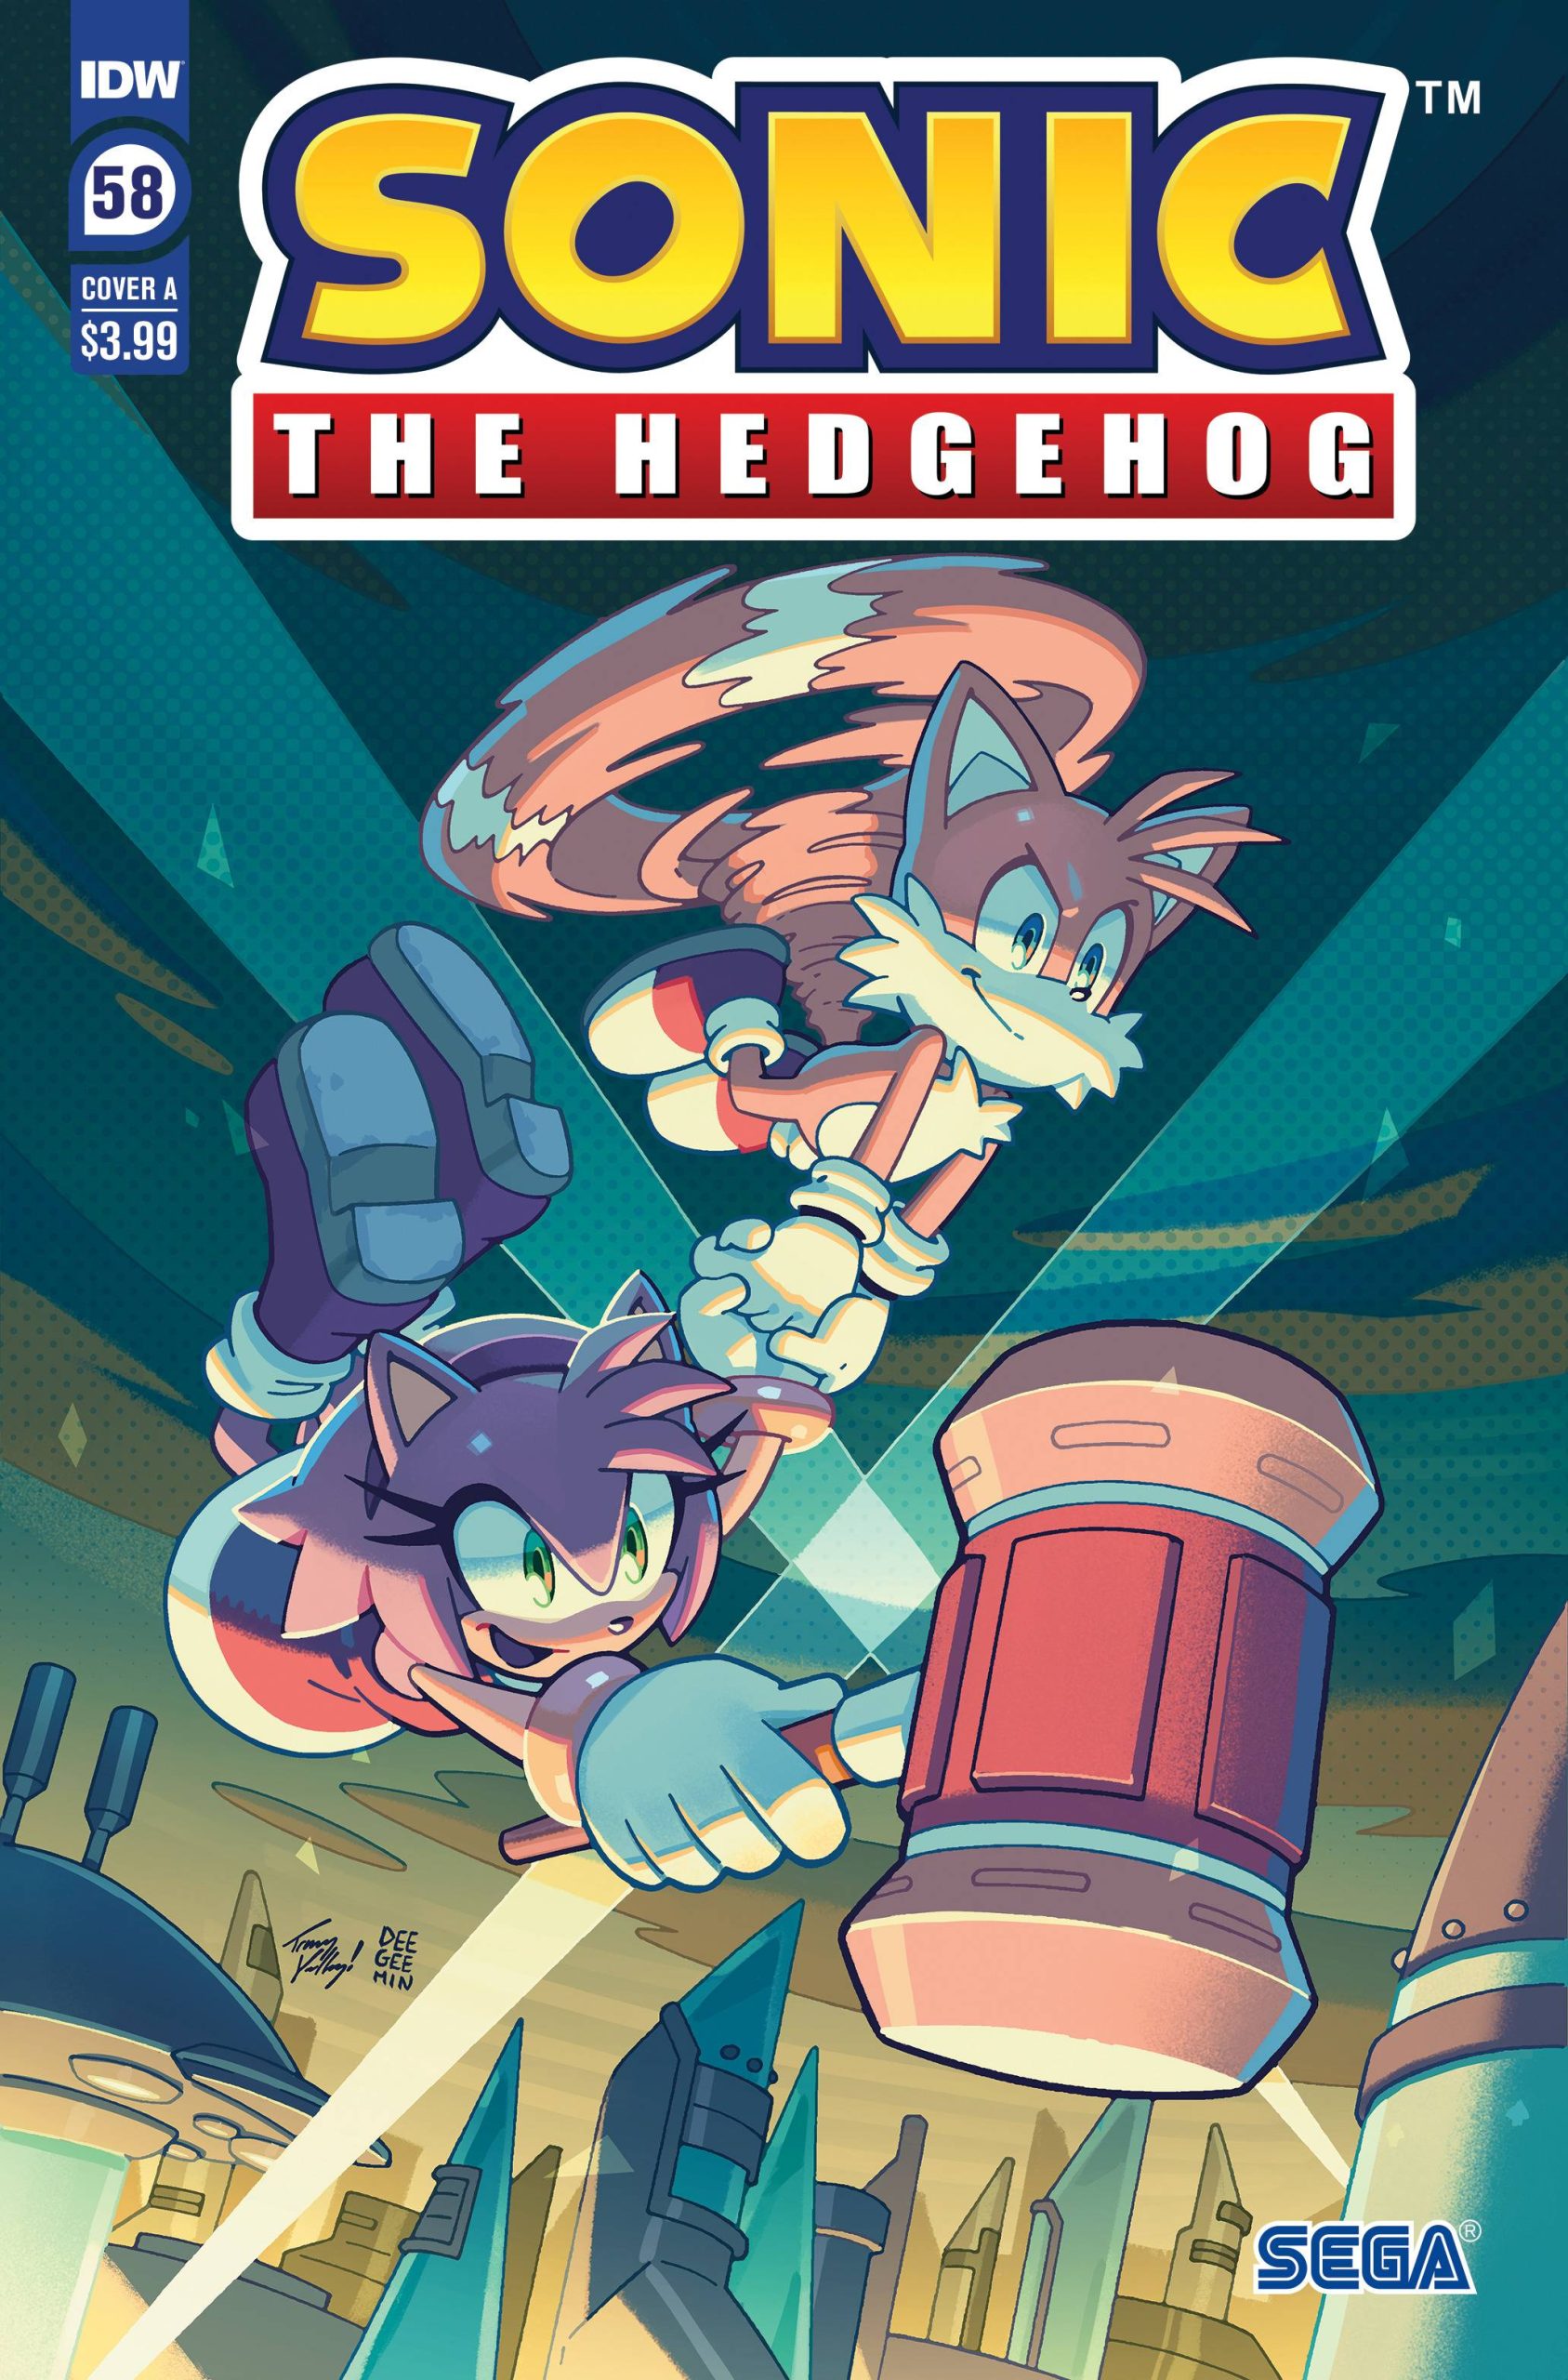 Sonic The Hedgehog #58 Cover A